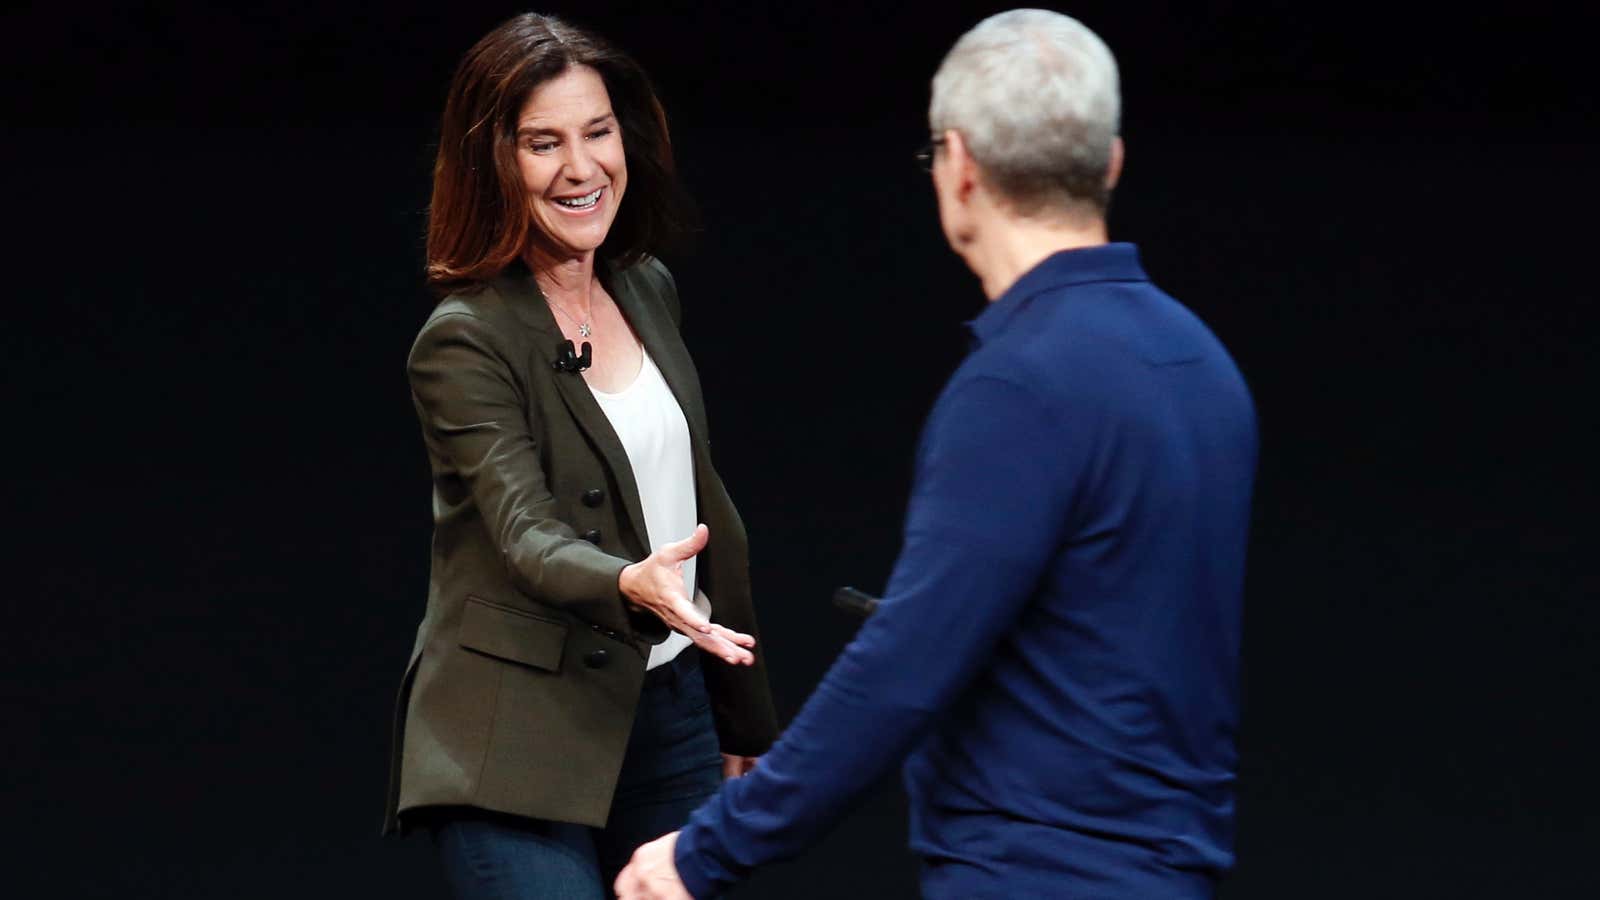 Susan Prescott is the first female Apple executive to speak at more than one event.